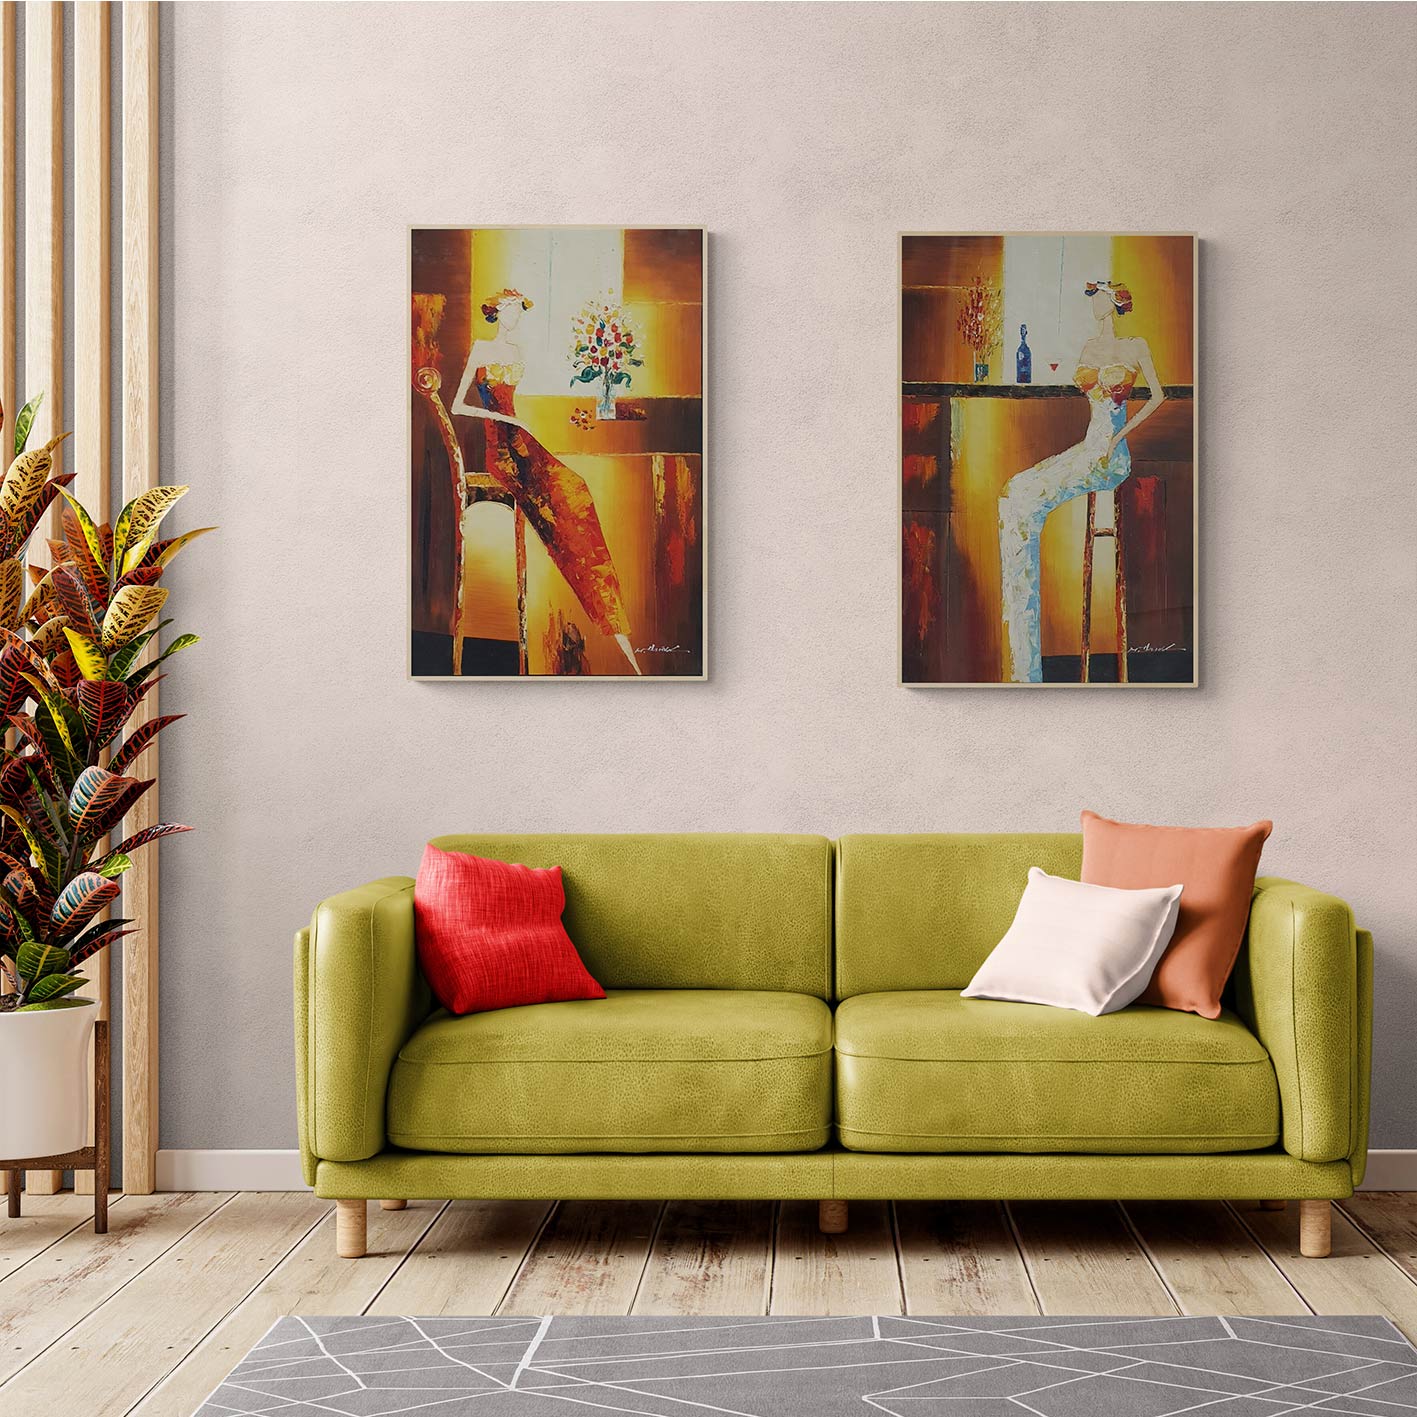 Bar II Diptych Painting 60x90 cm [2 pieces]